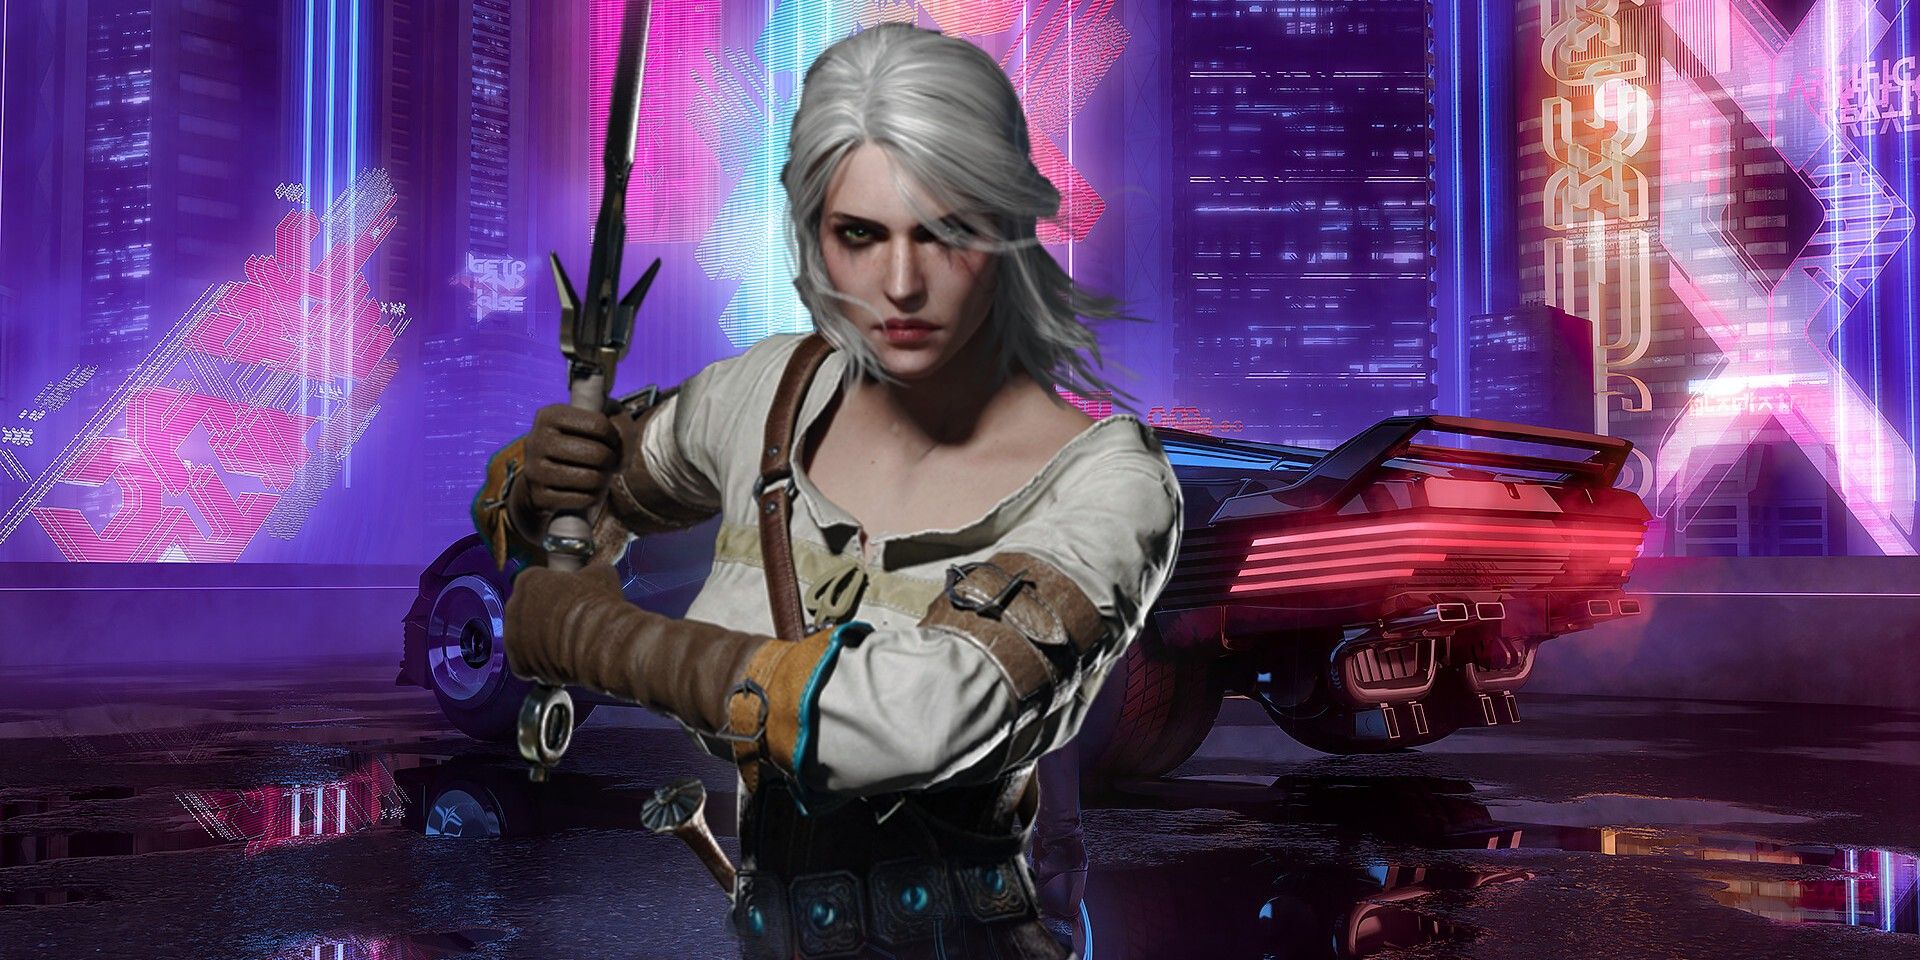 Will There Be A Witcher 4 After Cyberpunk 2077?